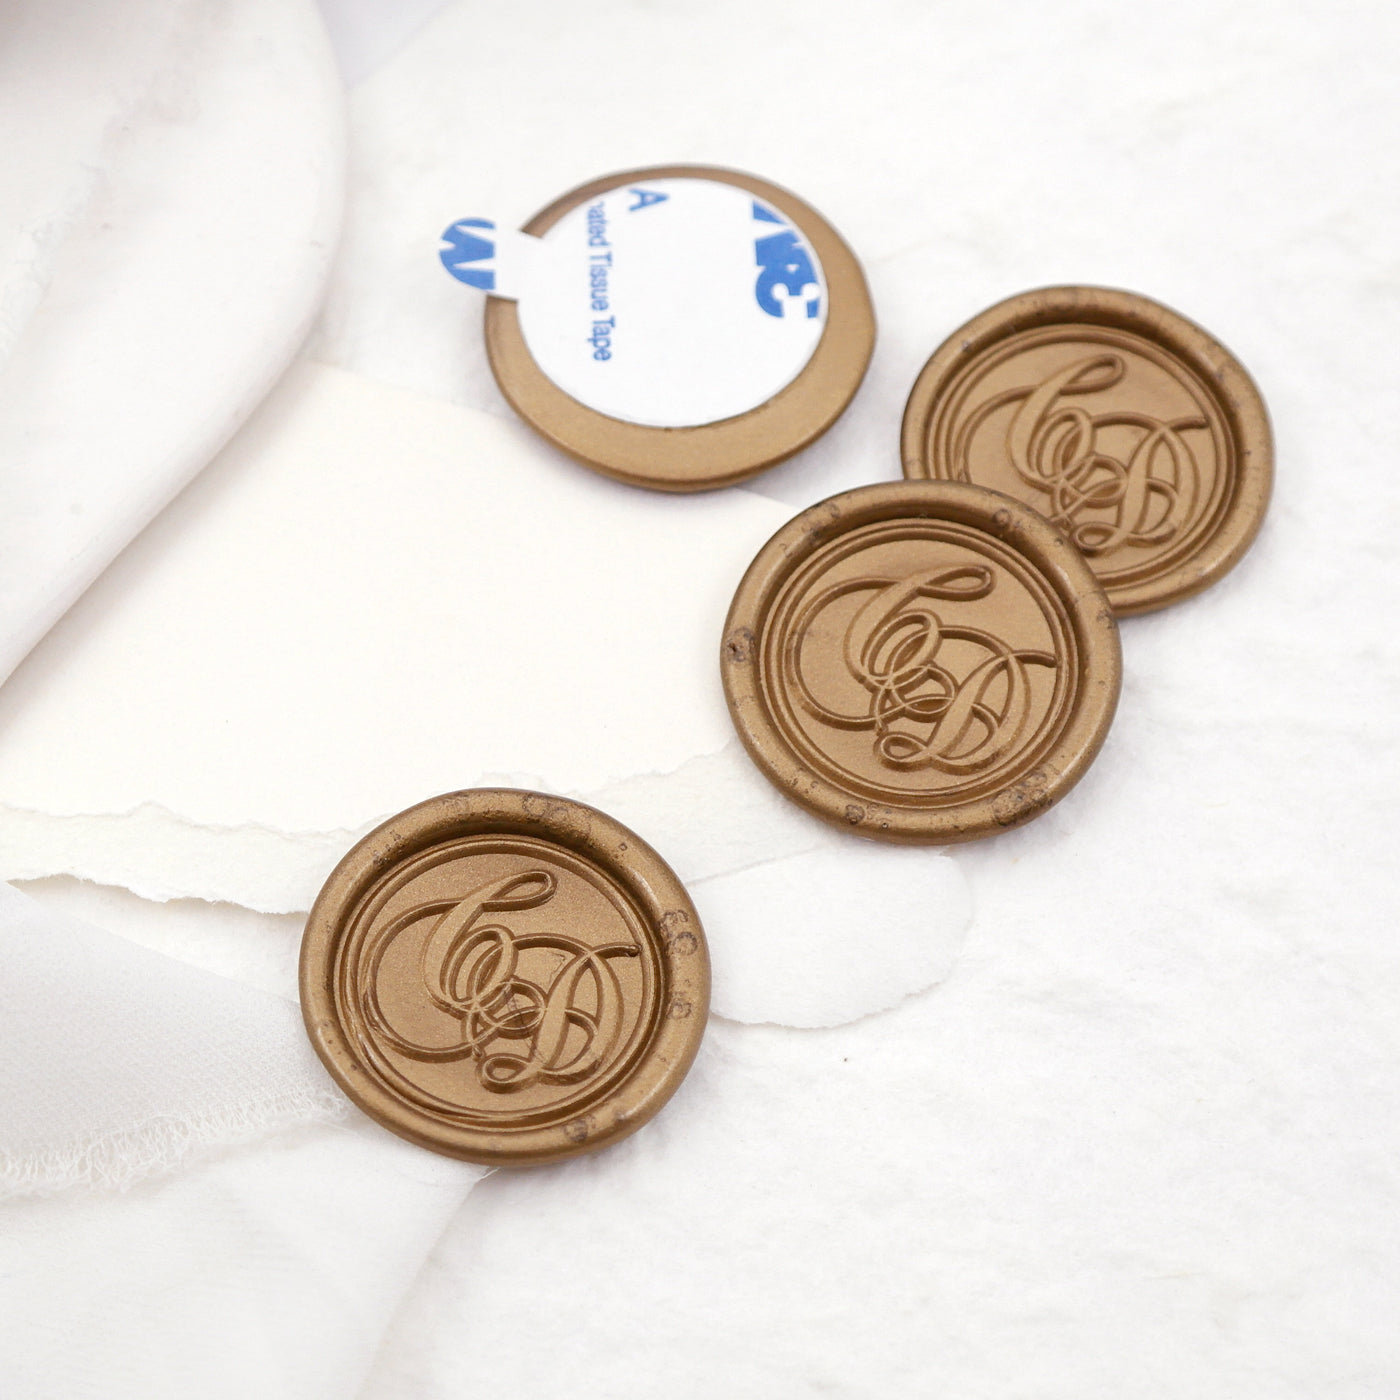 Four wax seals on the table, three wax seals with calligraphy alphabets , and other is the back with sticker